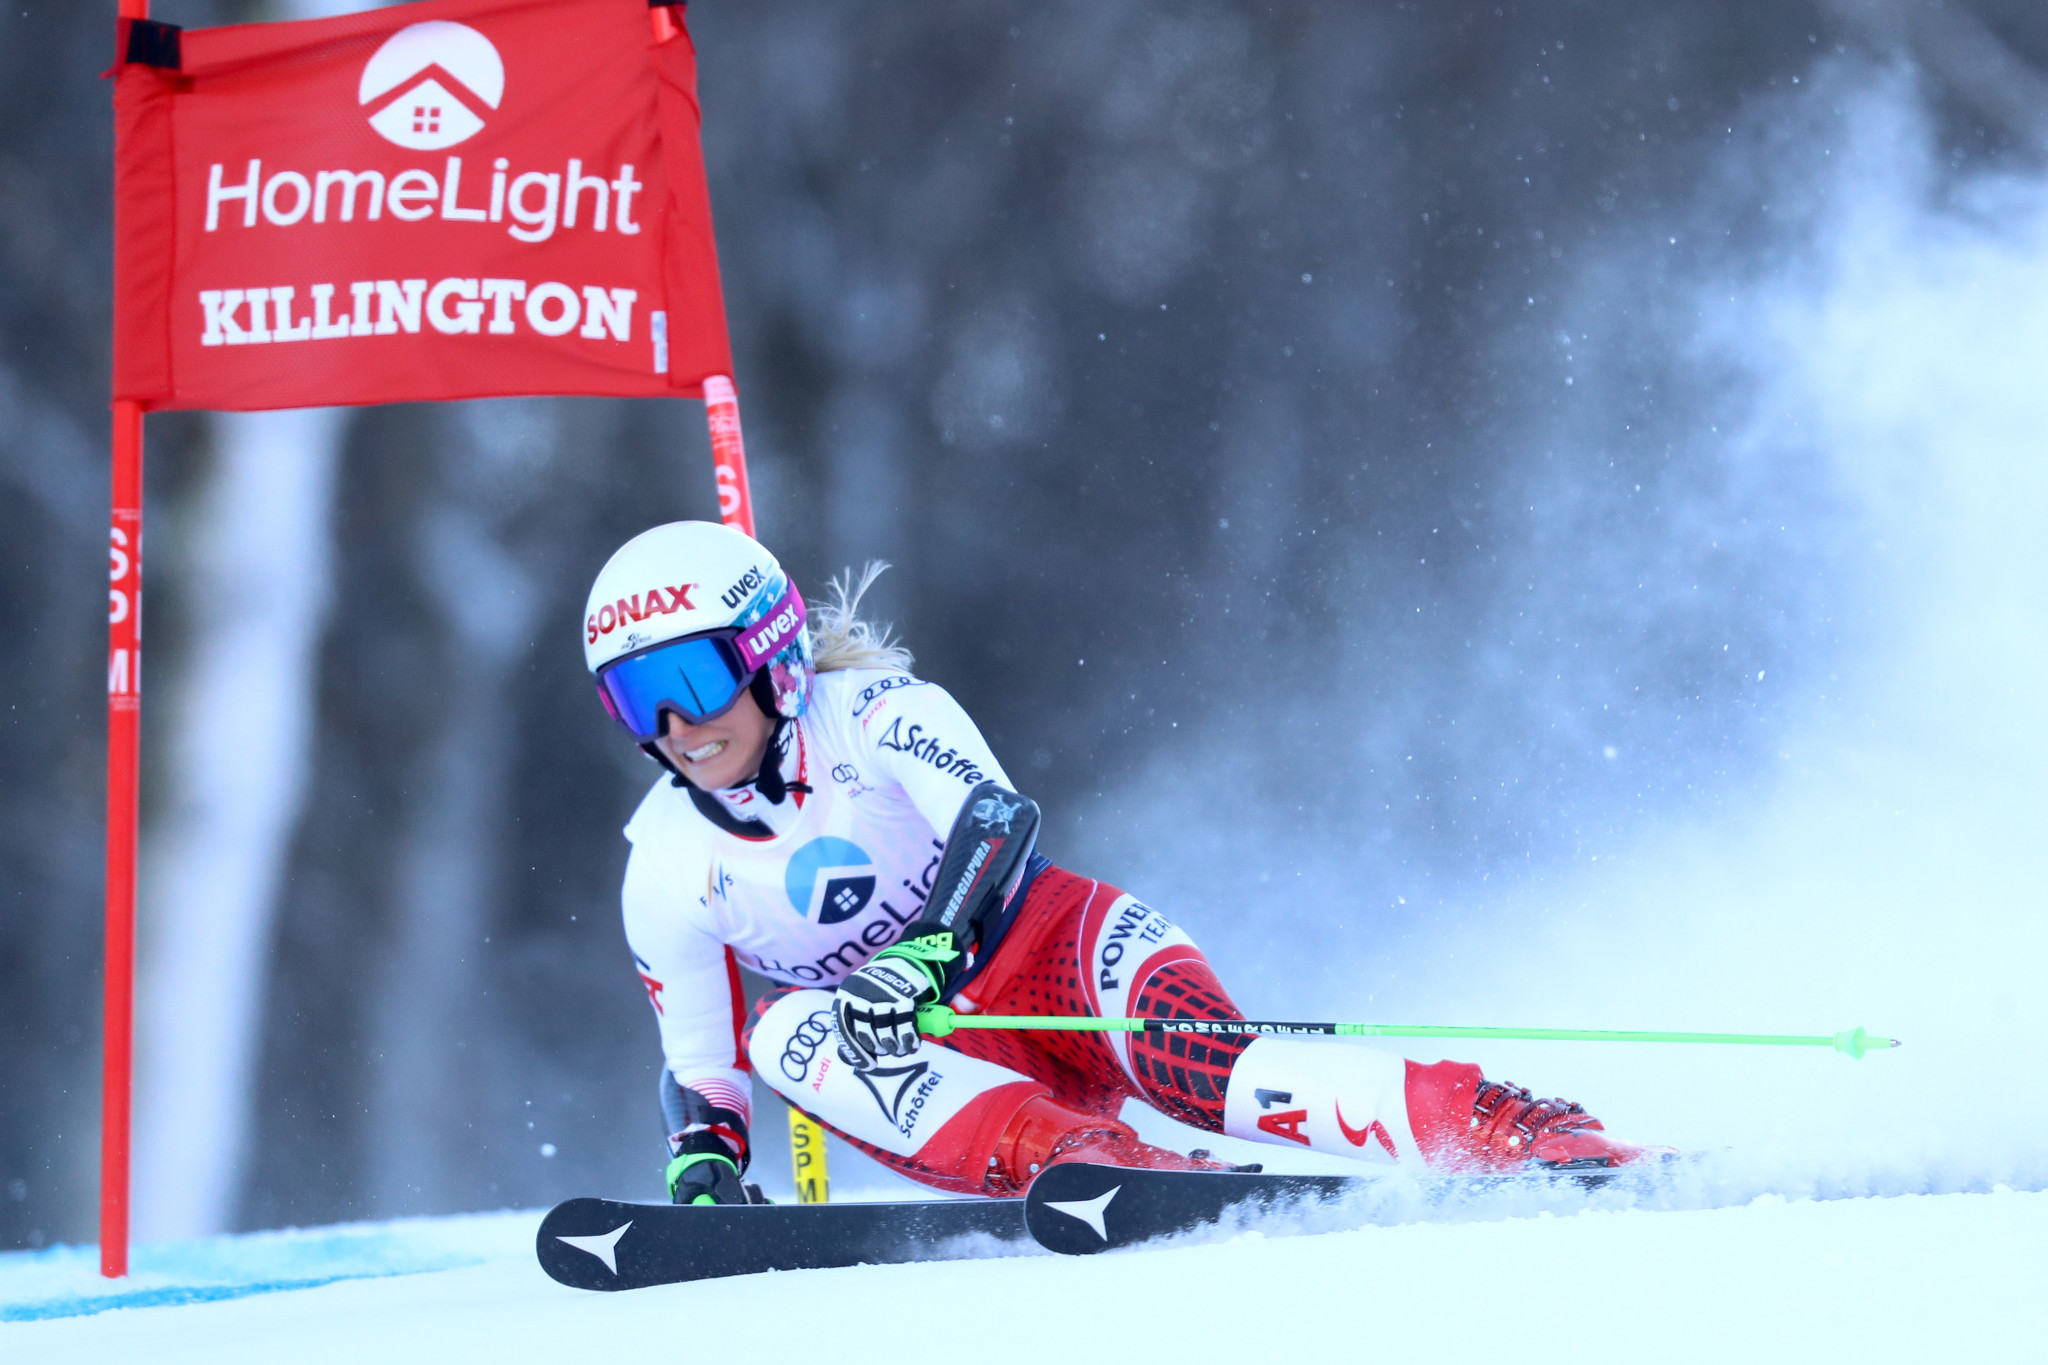 Killington World Cup Foundation awards grants to support winter sports infrastructure